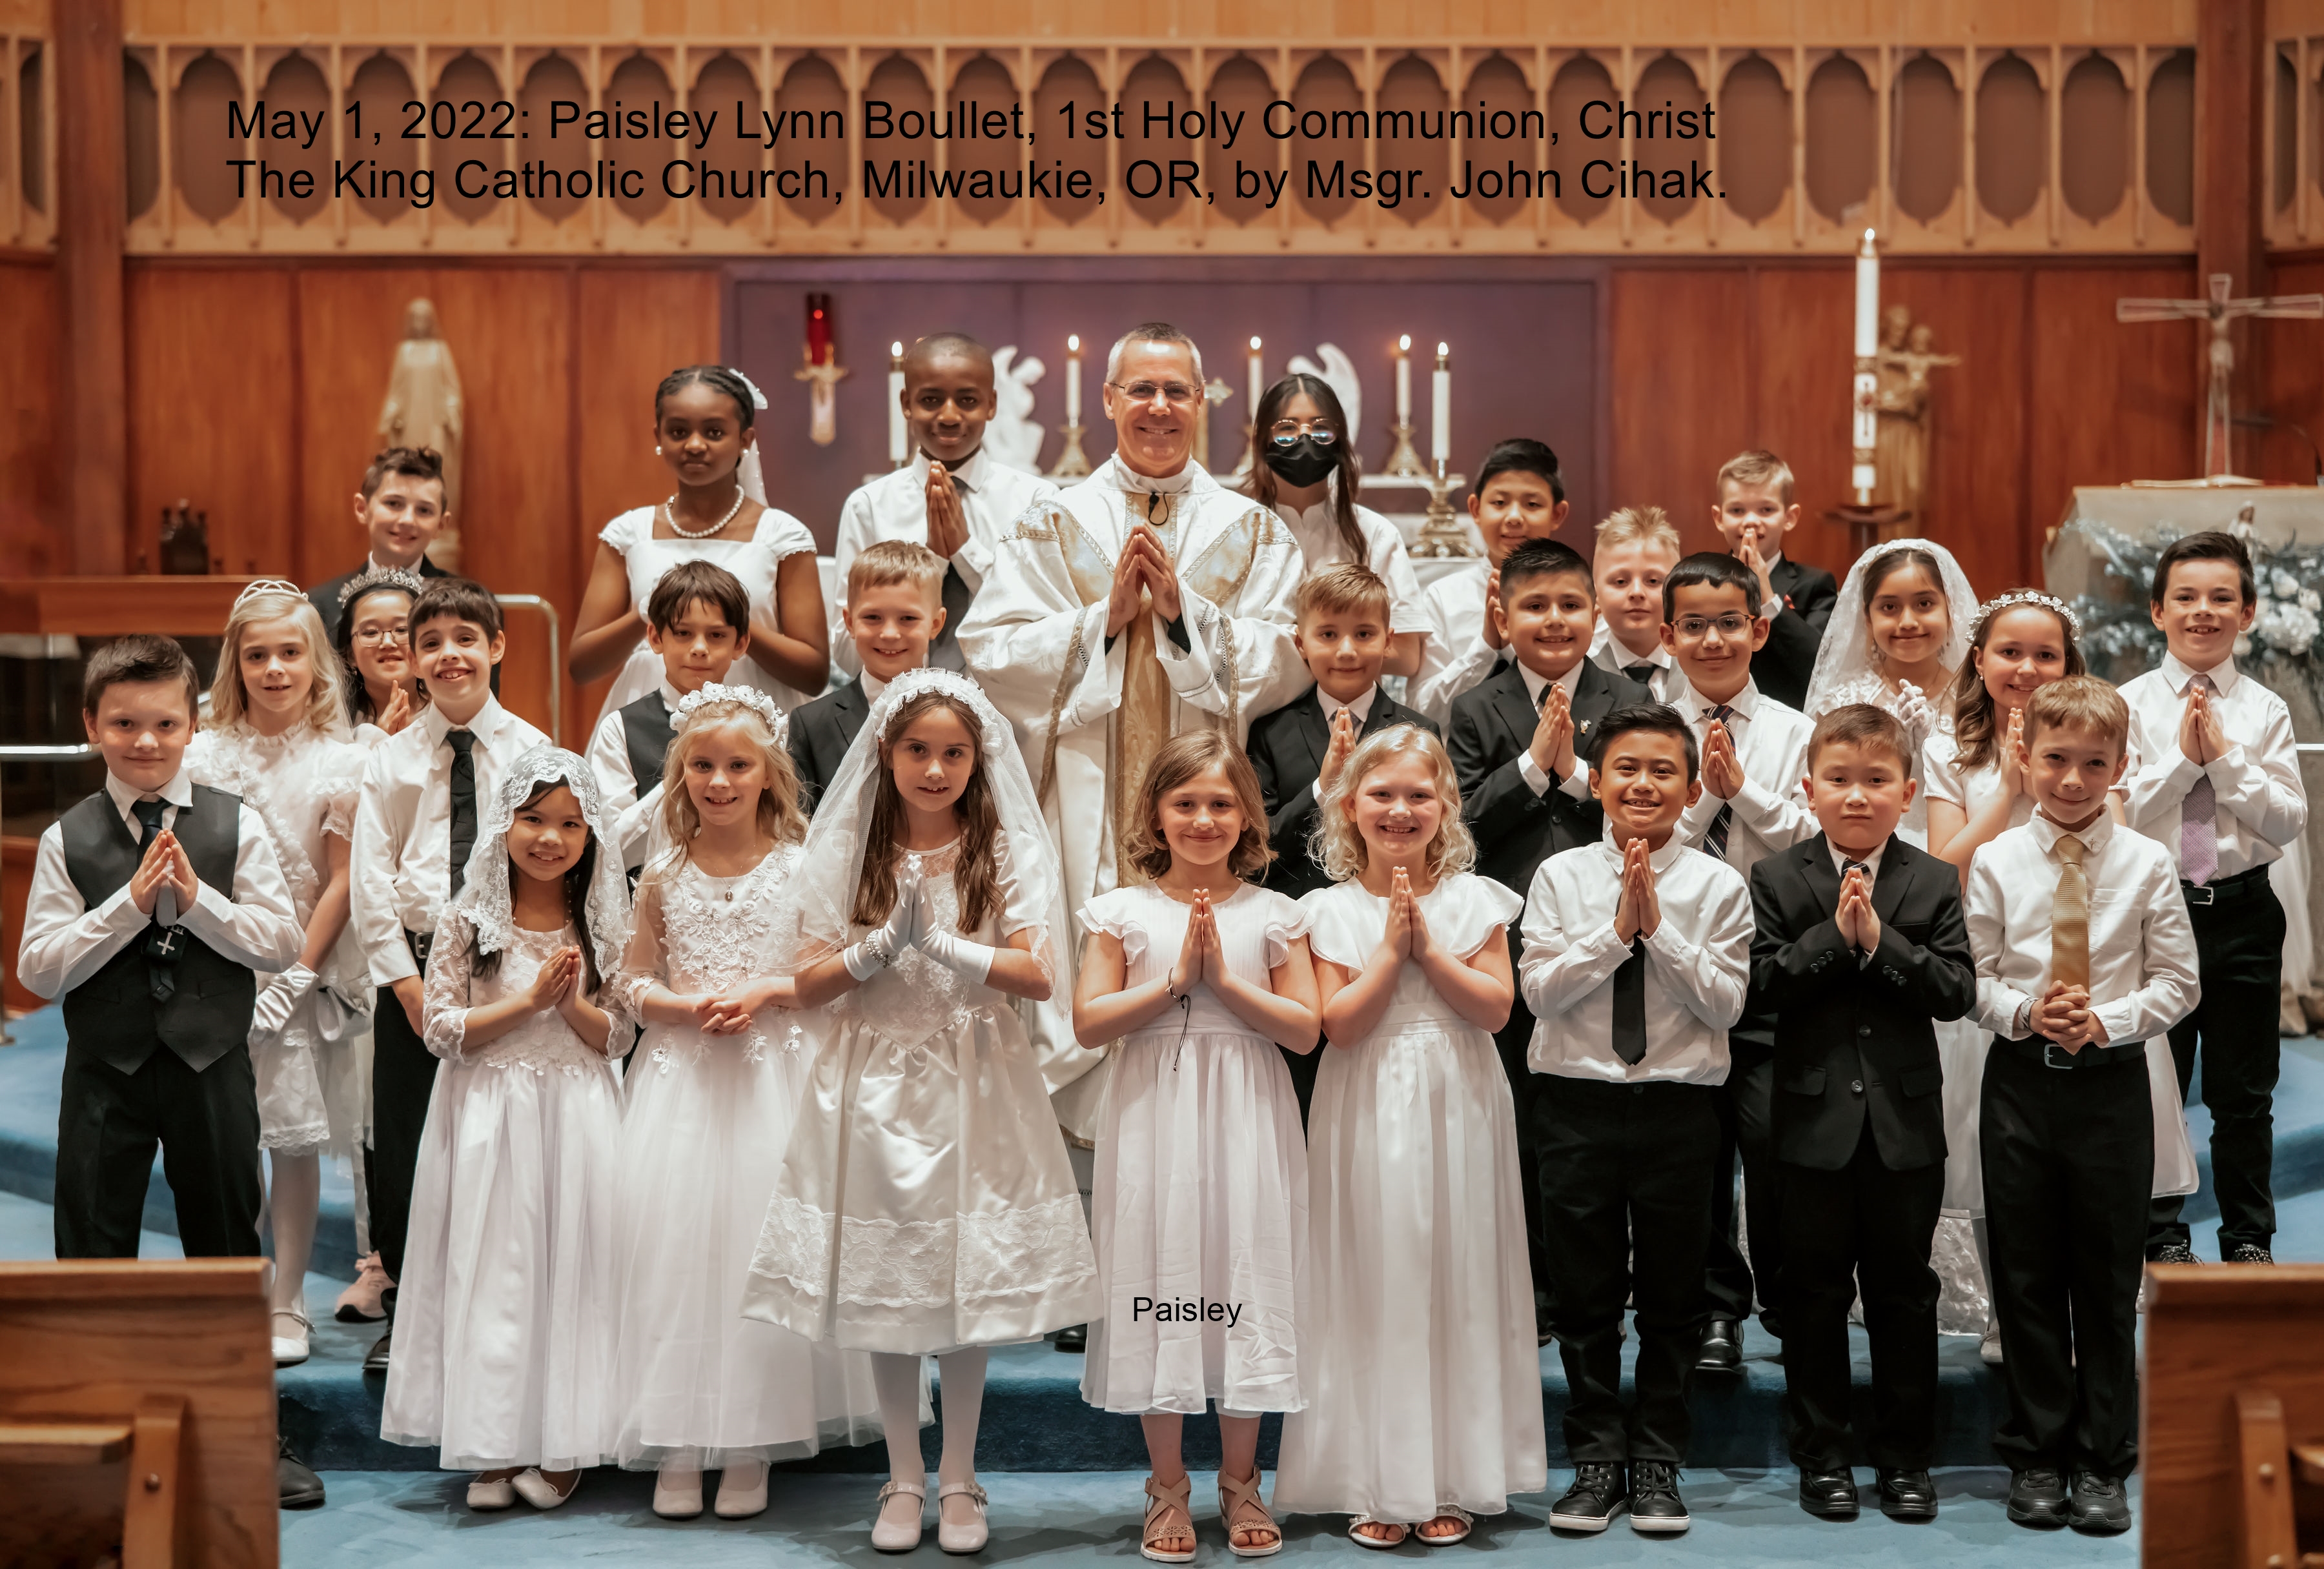 May 1, 2022:  Paisley Lynn Boullet 1st Holy Communion group picture with Msgr. John Cihak.